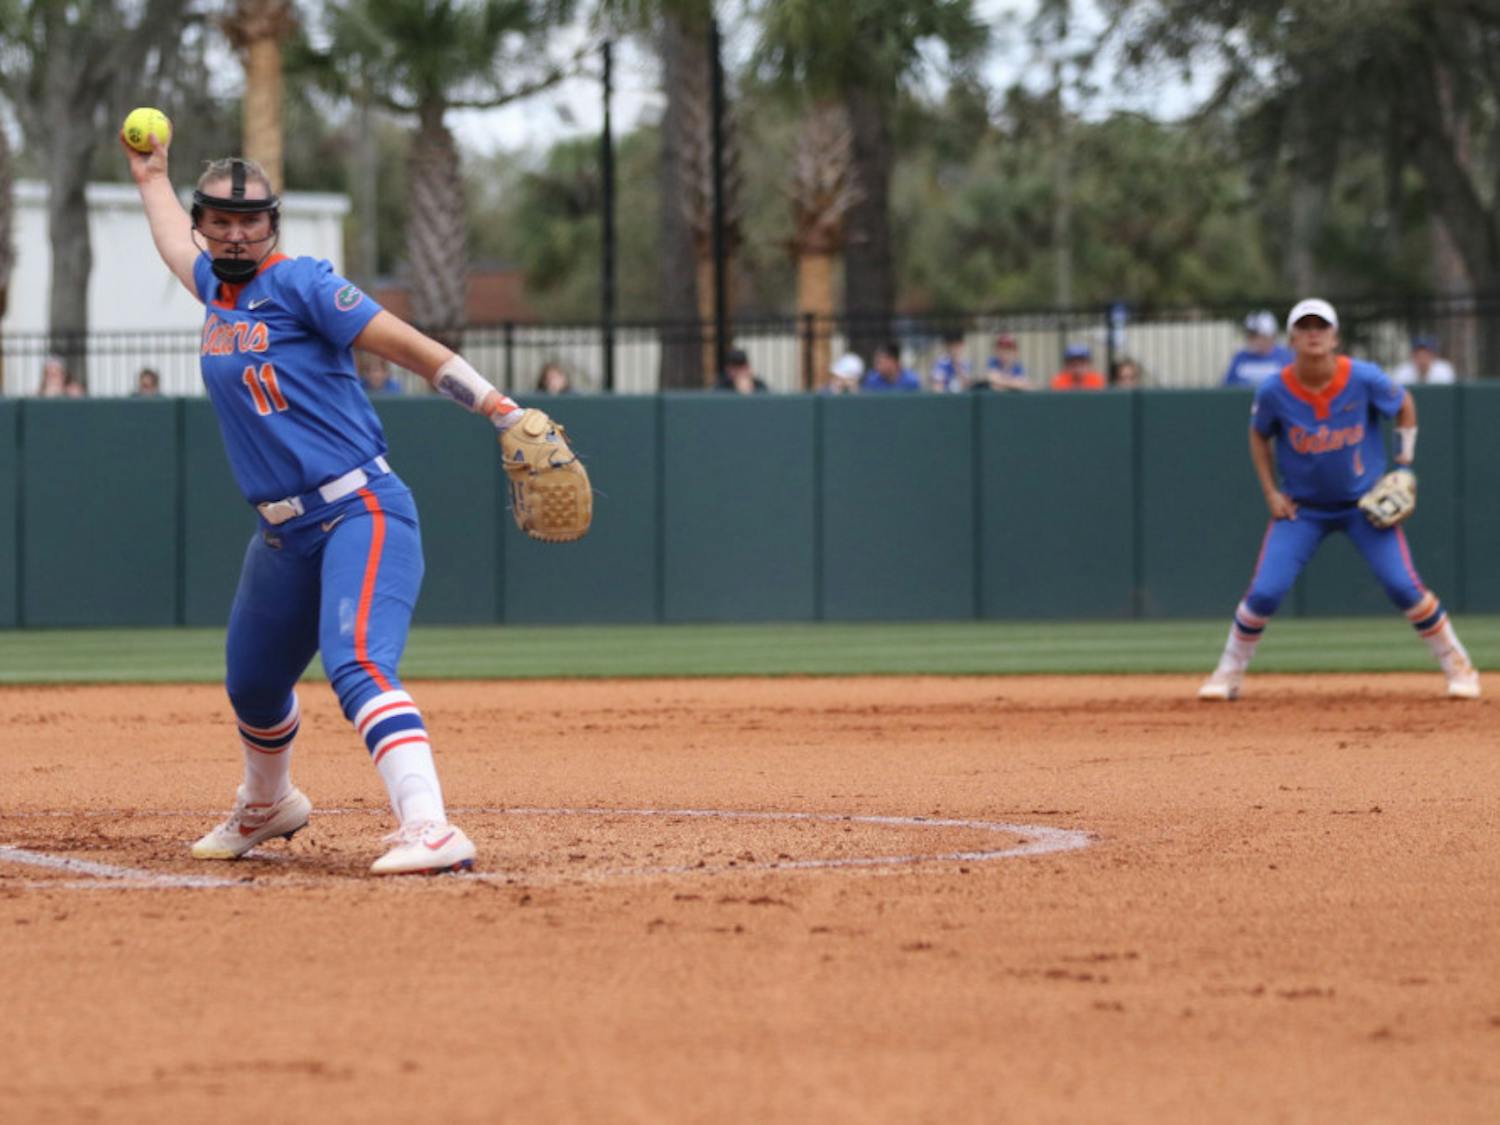 Florida pitcher Kelly Barnhill is fourth in the SEC in ERA at 0.59 with the second-highest innings pitched (47.2). She has earned SEC Pitcher of the Week three weeks in a row.
&nbsp;